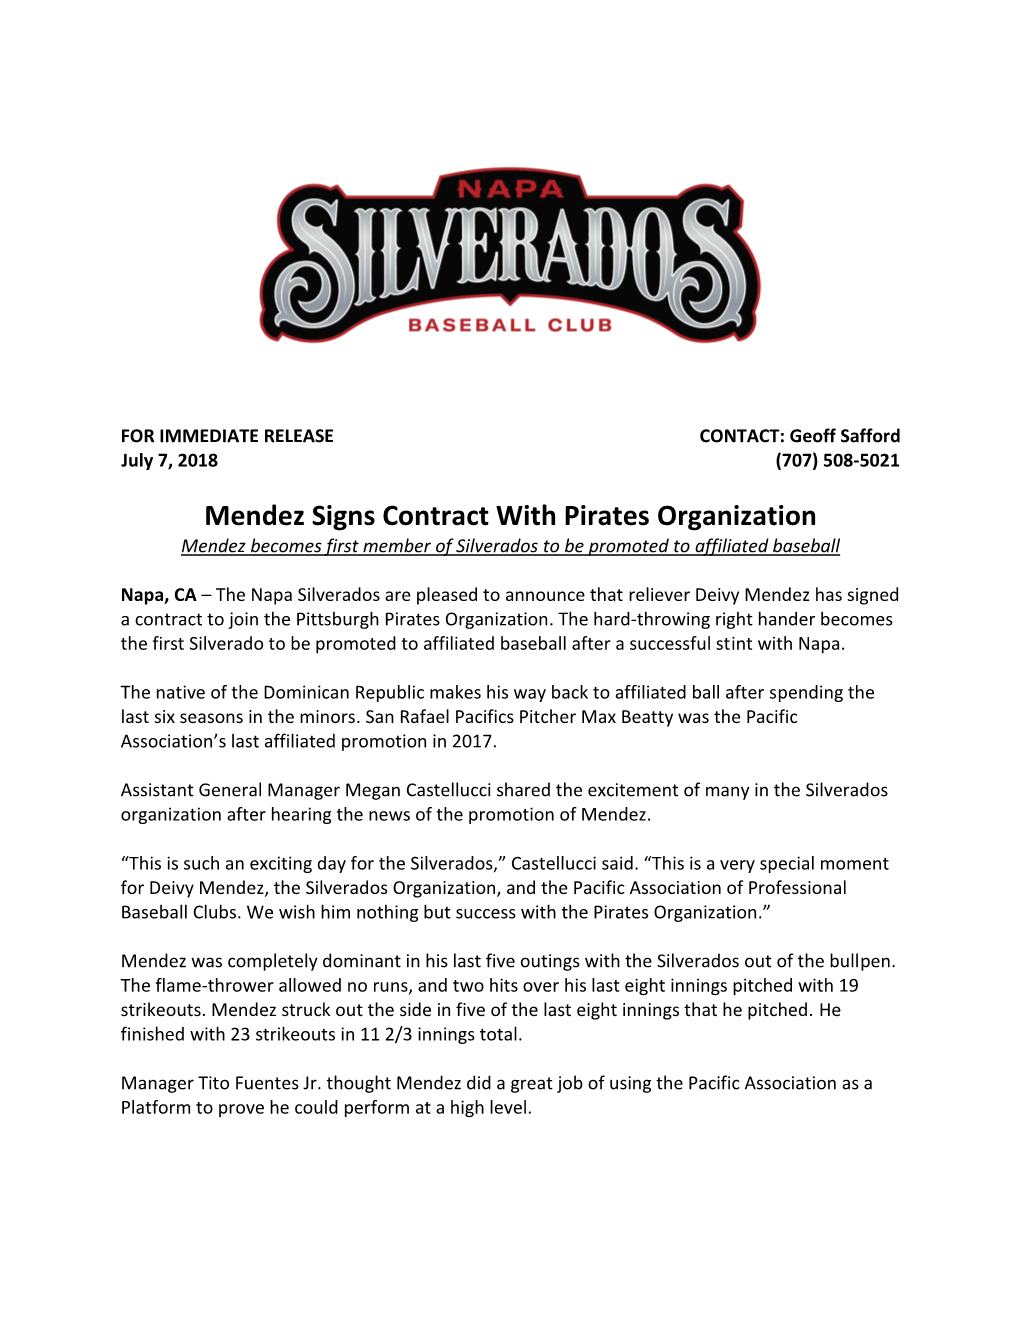 Mendez Signs Contract with Pirates Organization Mendez Becomes First Member of Silverados to Be Promoted to Affiliated Baseball